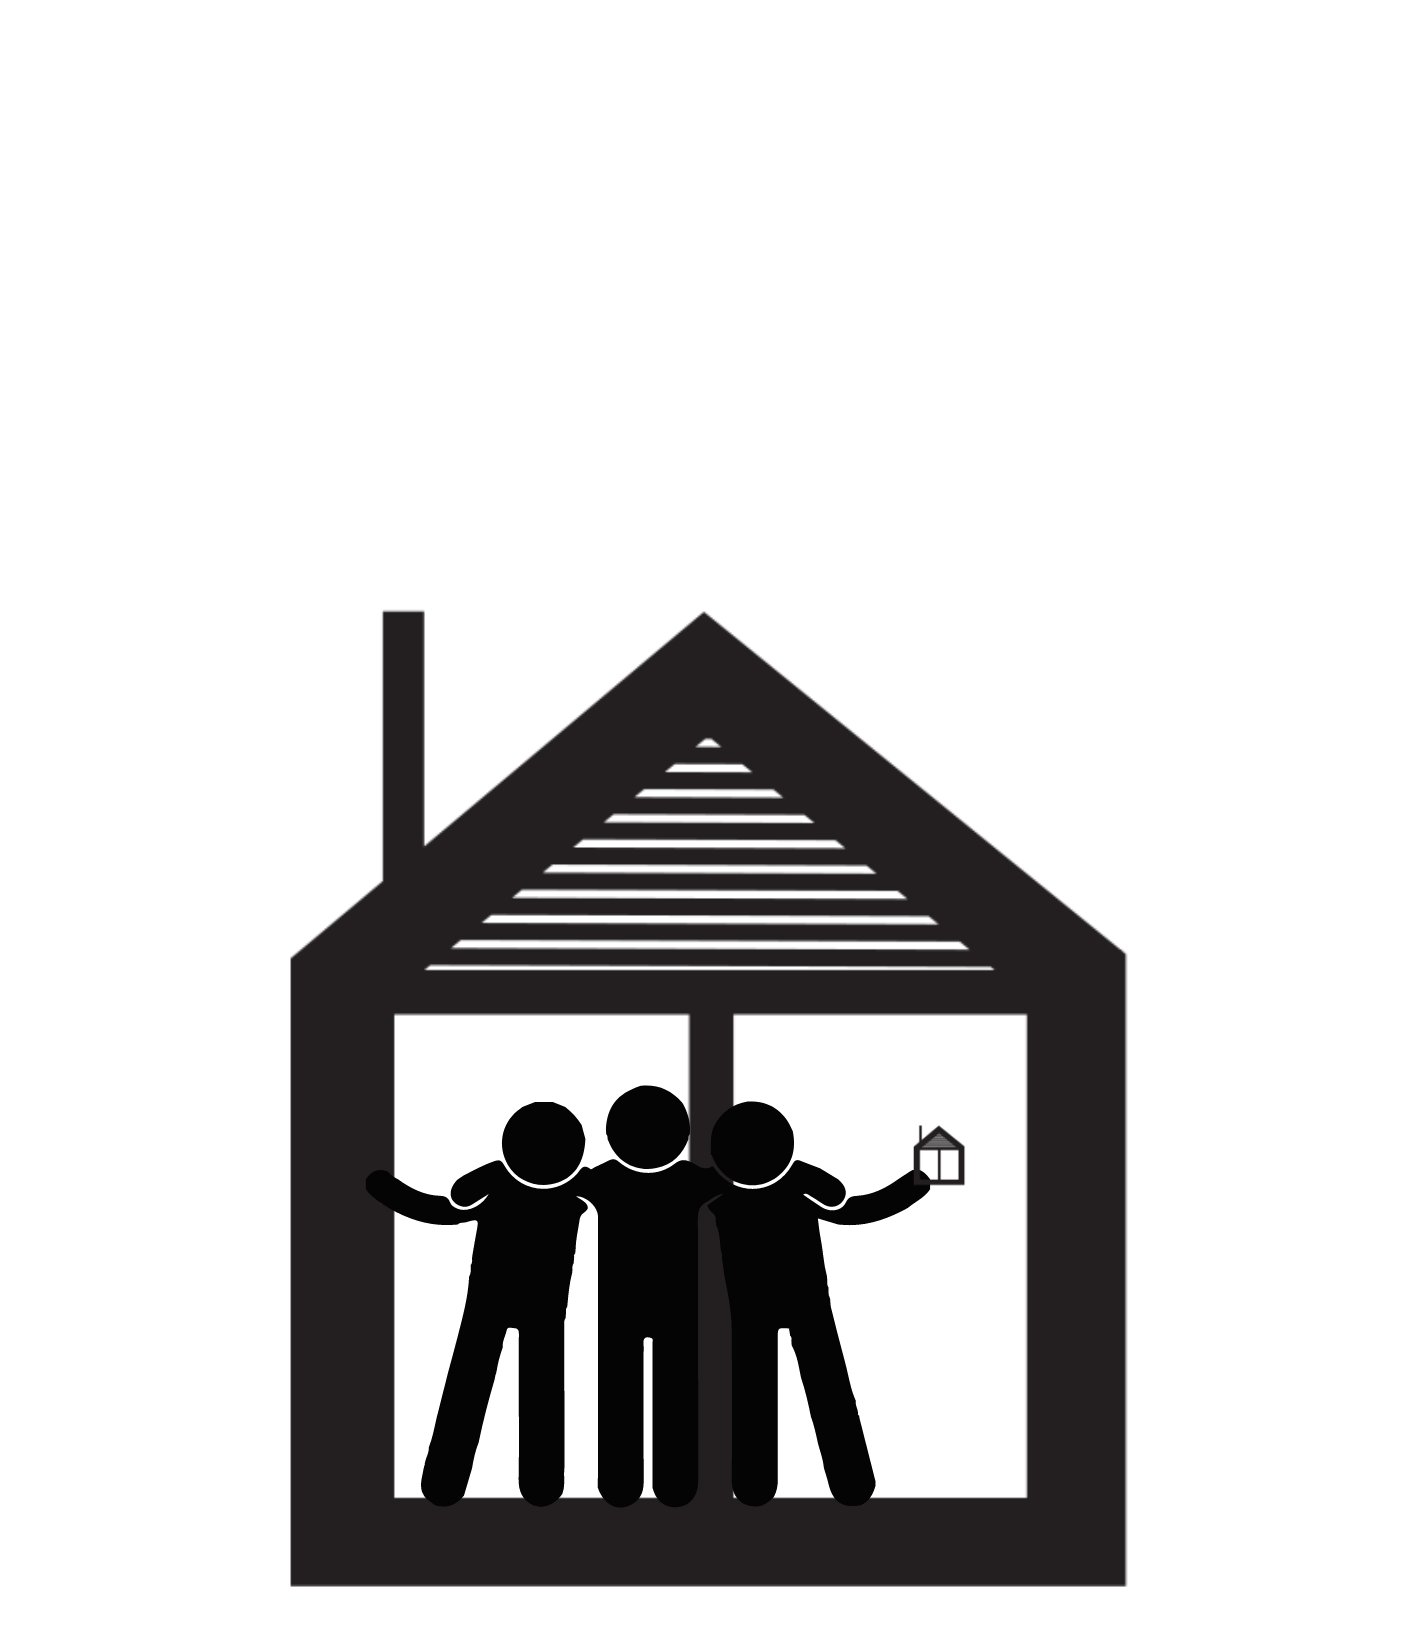 Kabn Company logo showing a pitched cabin in silhouette.